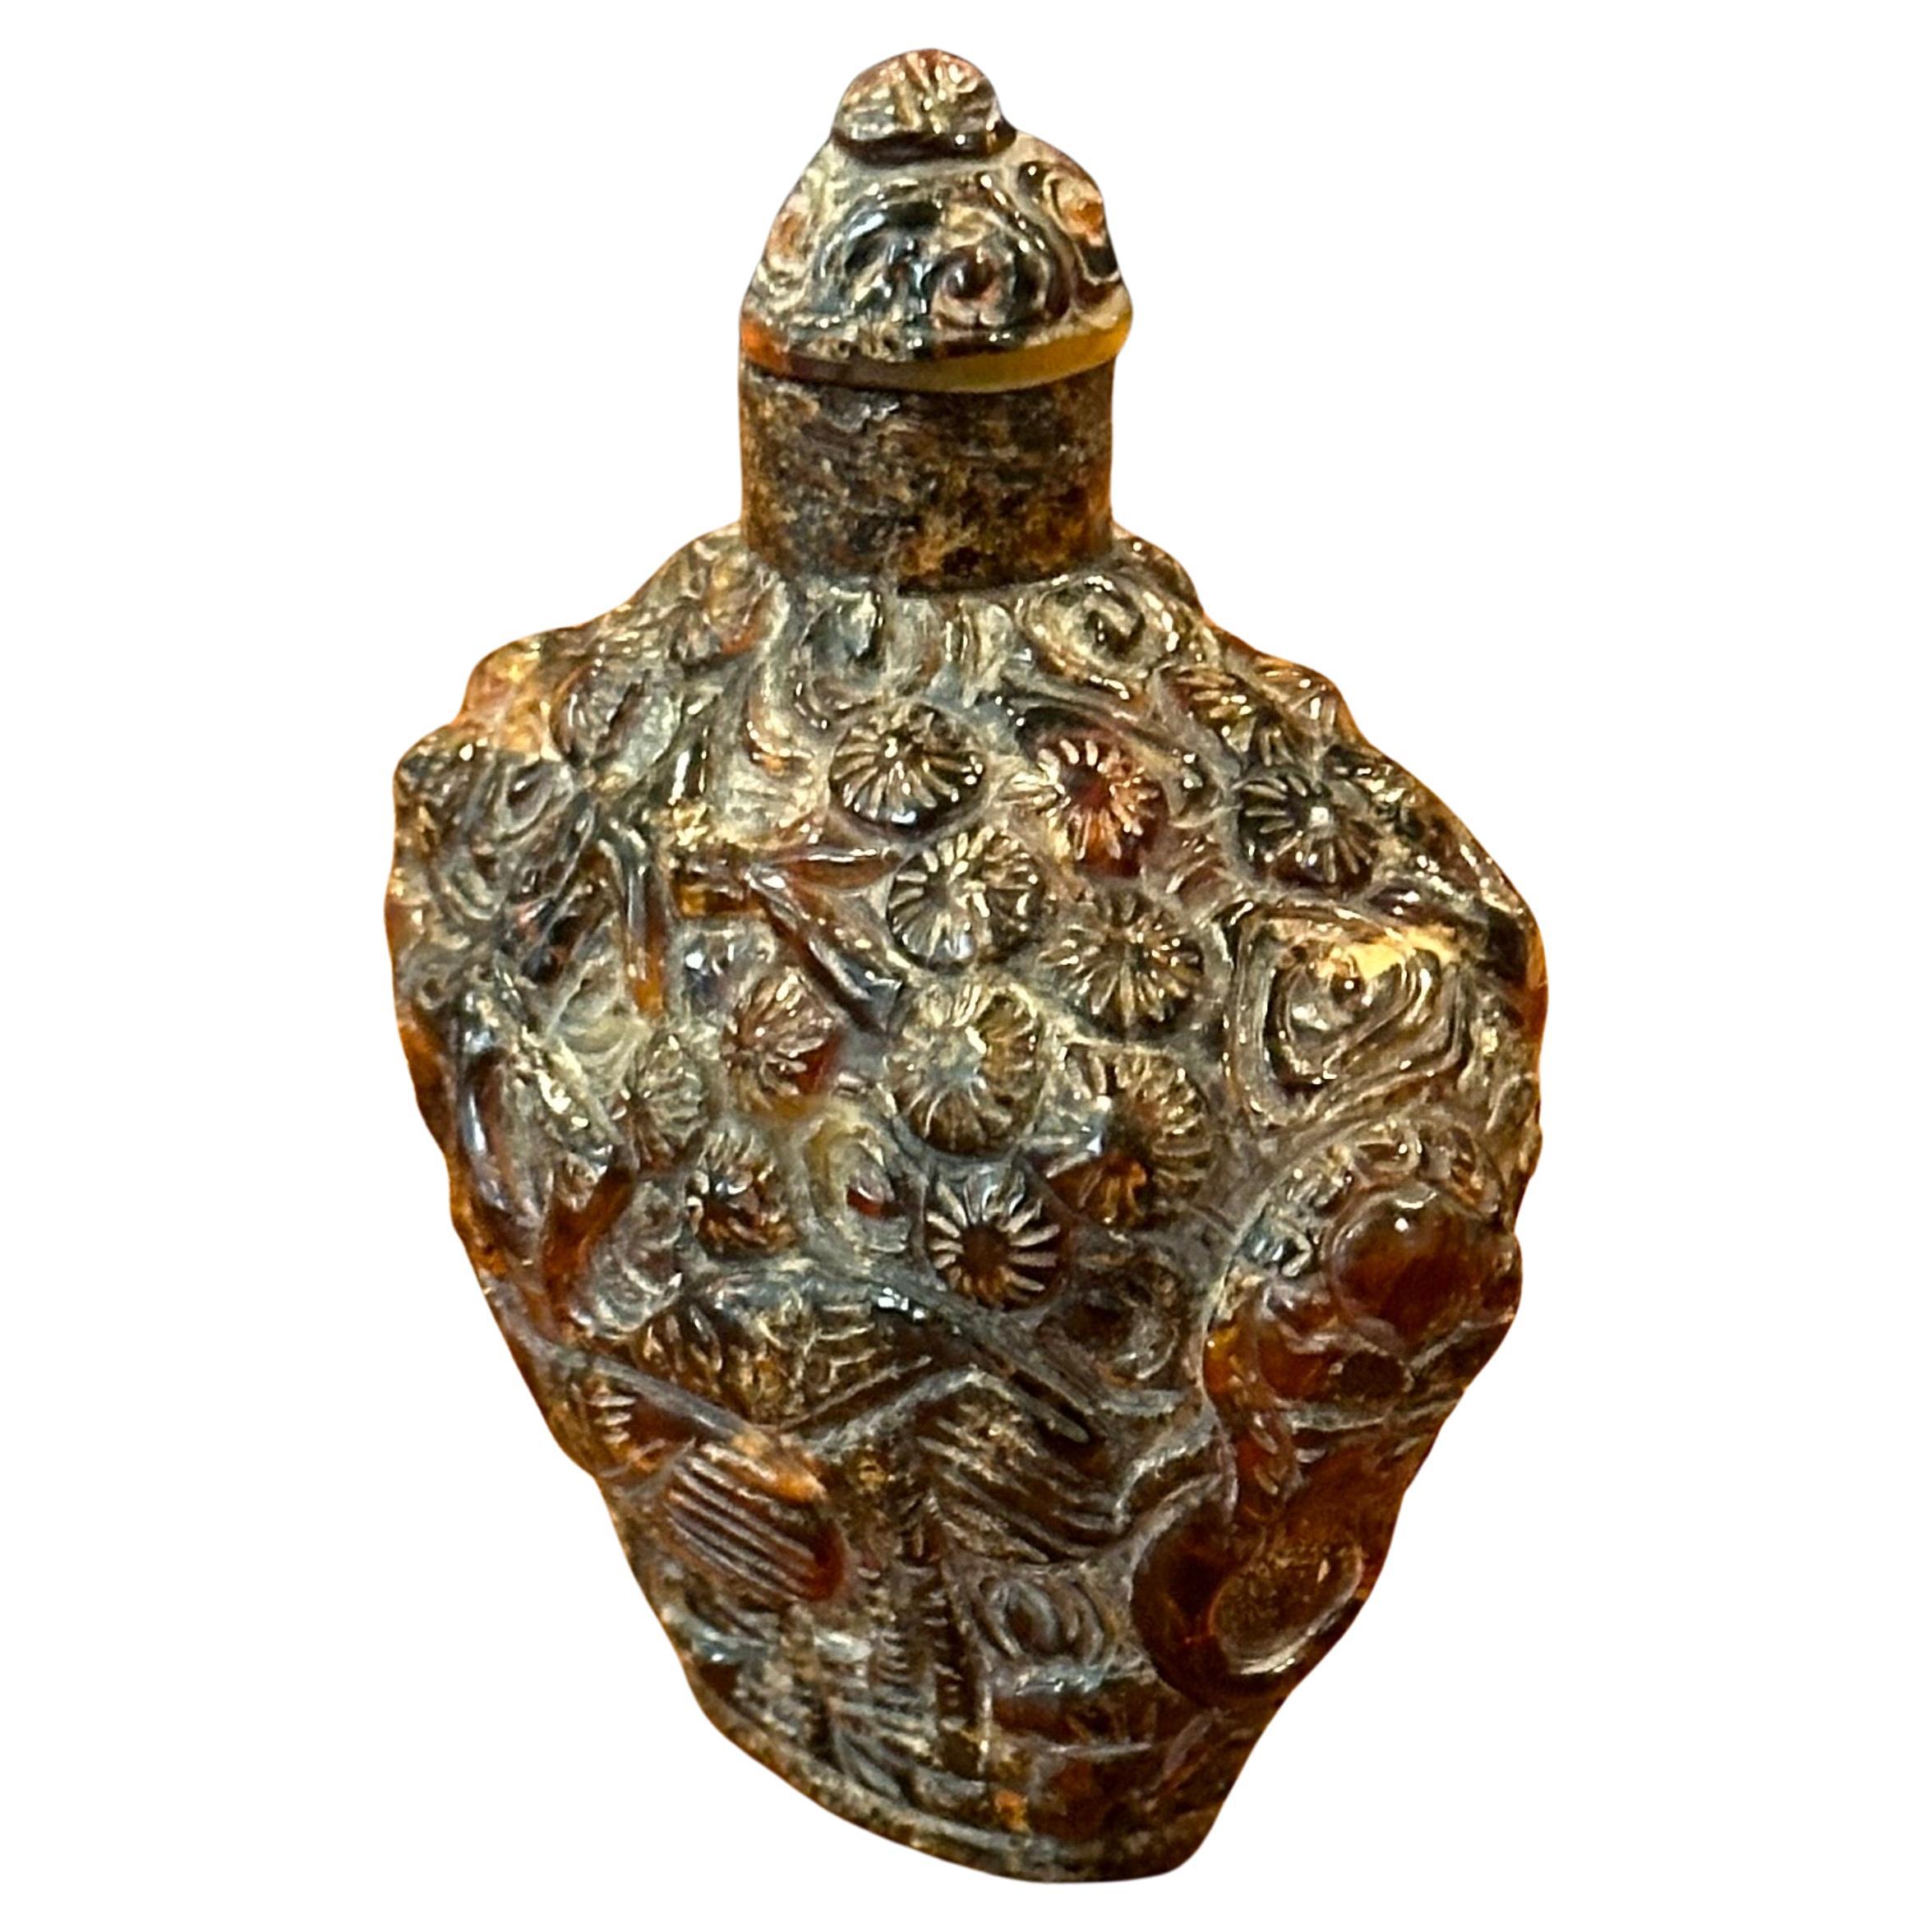 A vintage Chinese relief amber snuff bottle, circa 1970s.   Amber is fossilized tree resin that has been appreciated for its color and natural beauty since Neolithic times. Much valued from antiquity to the present as a gemstone, amber is made into